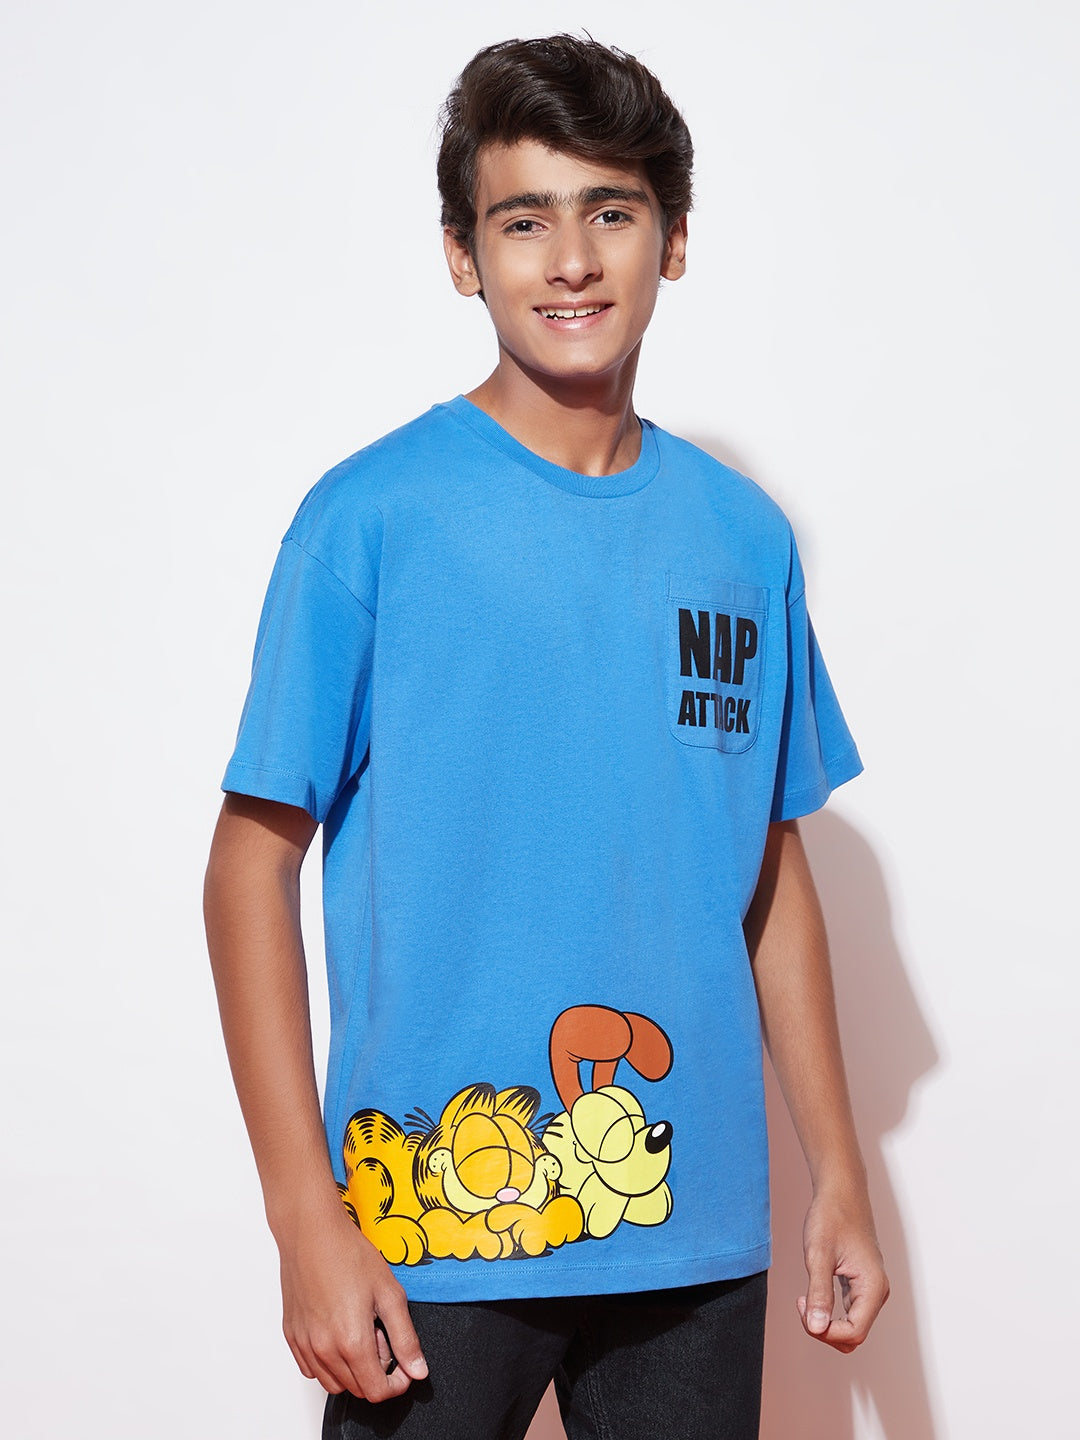 Teen Garfield and Odie blue nap-attack printed T-shirt